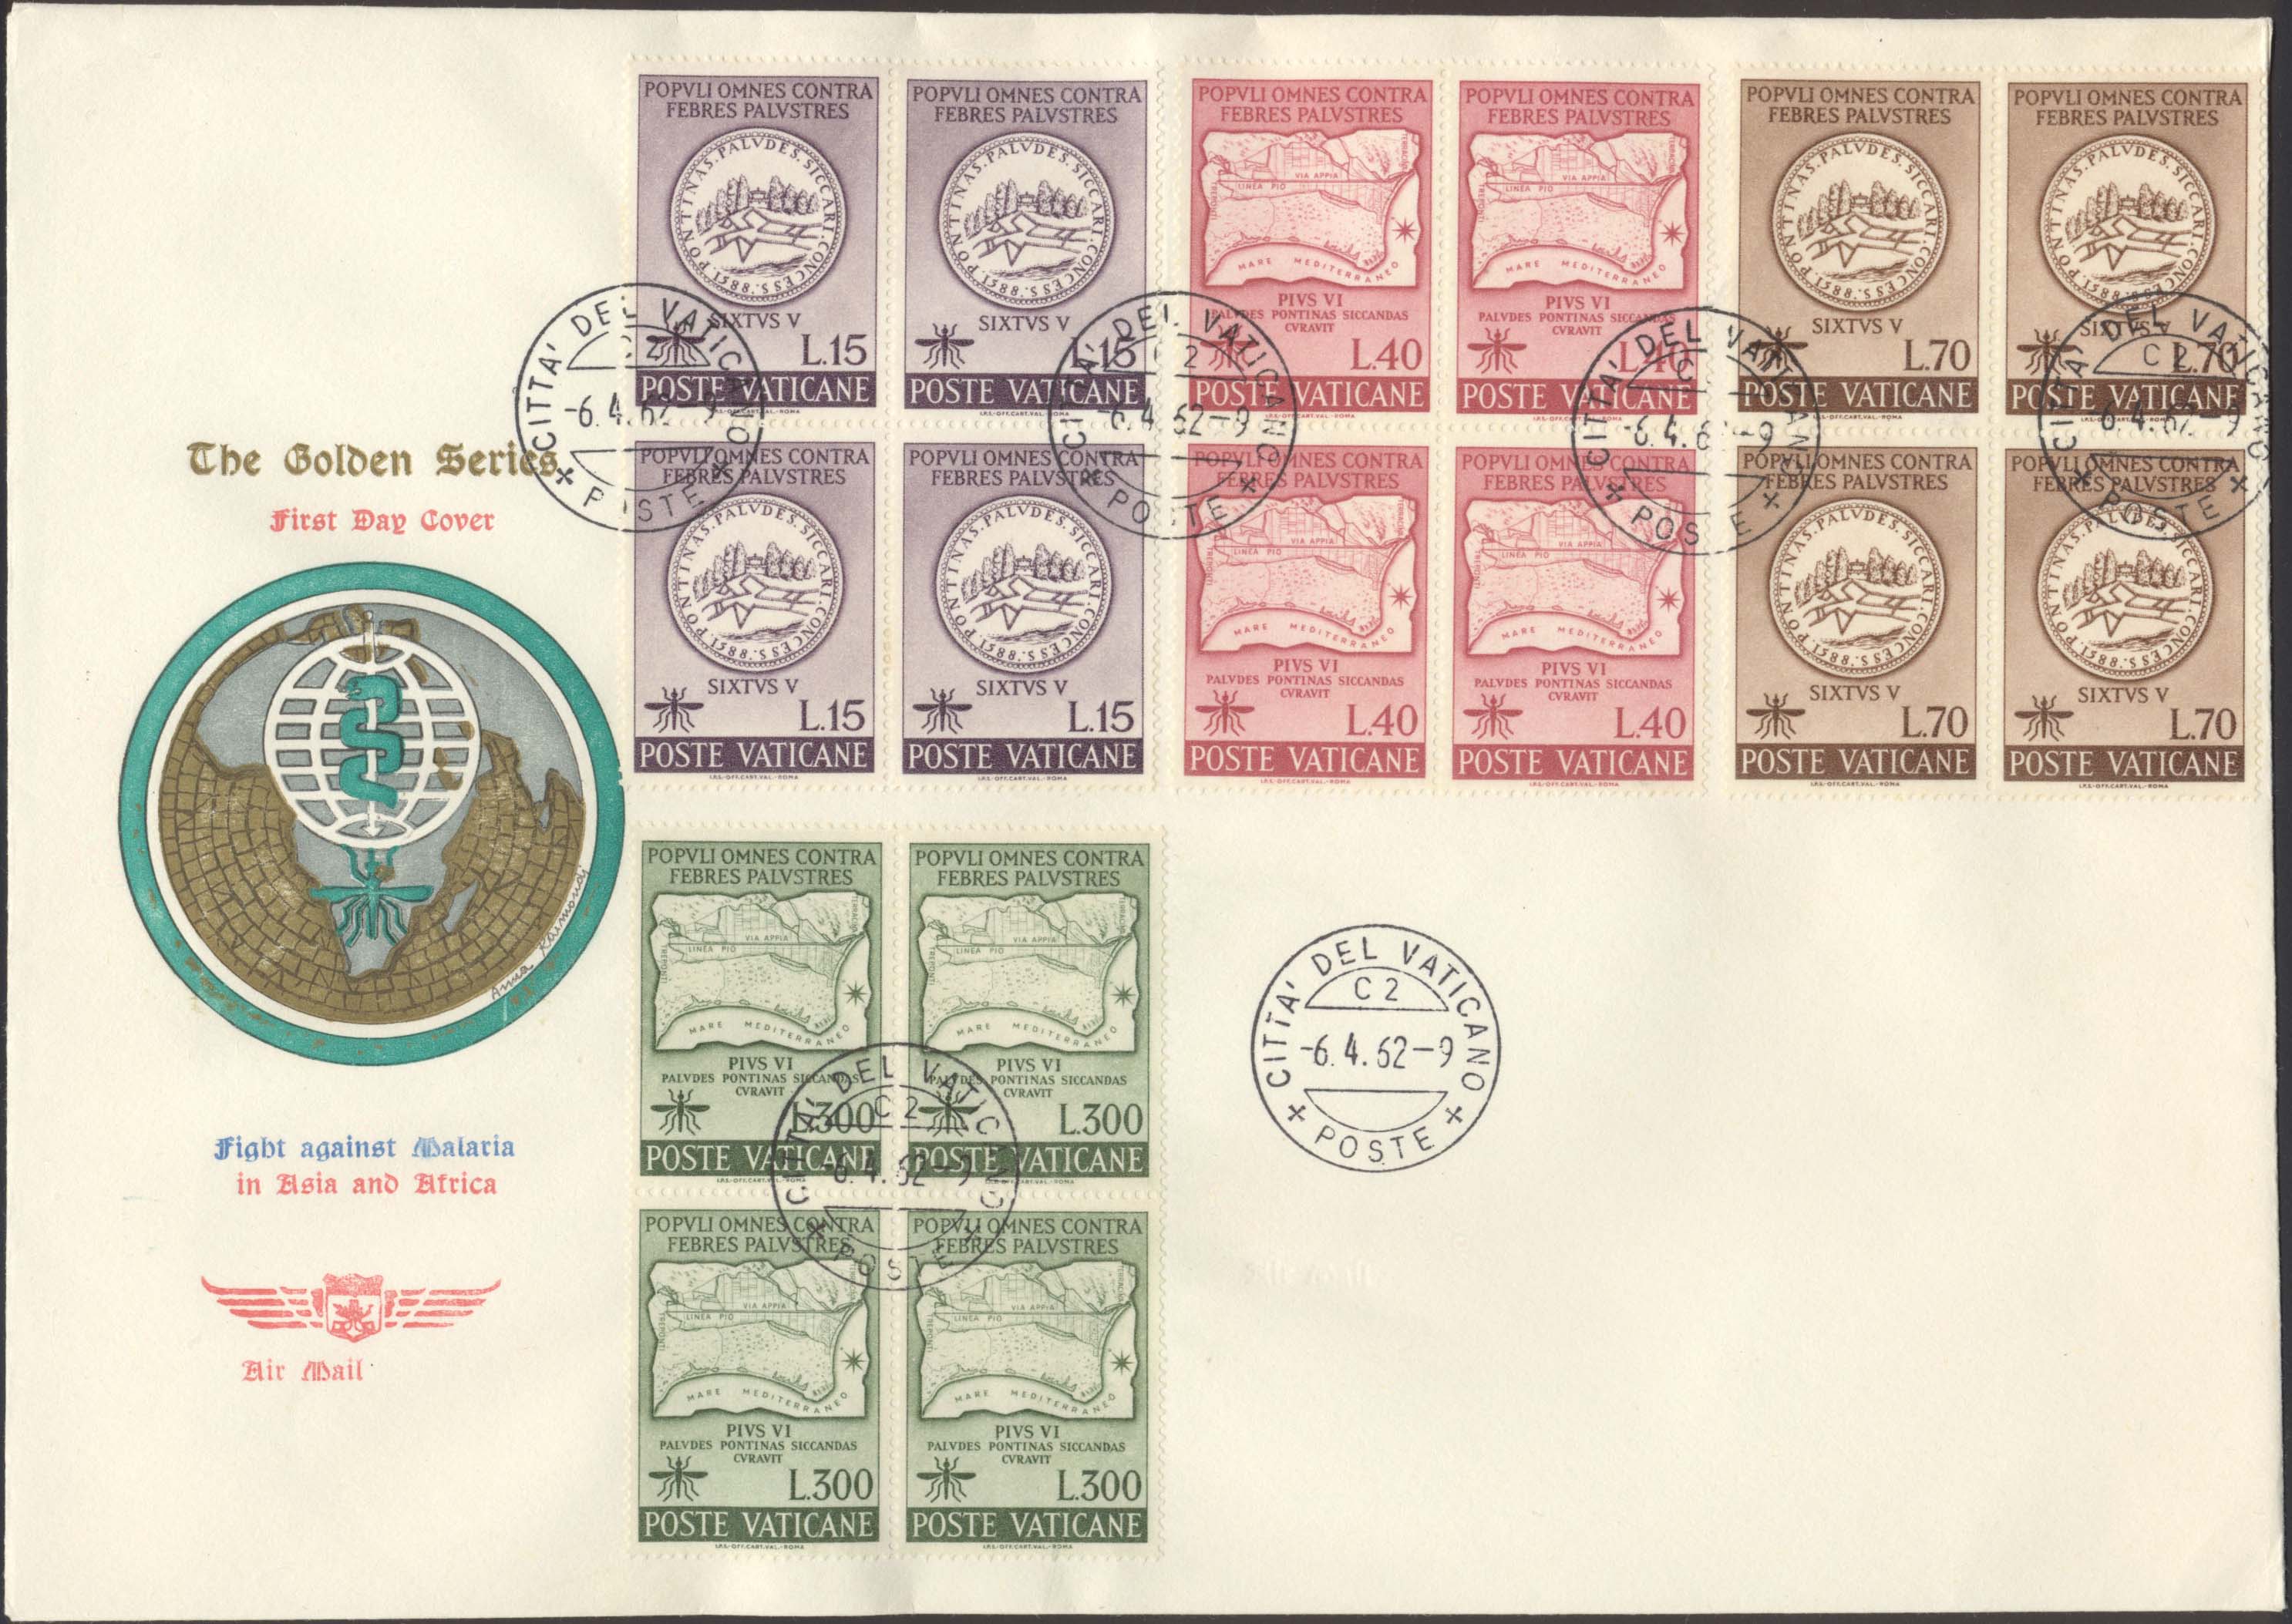 Scott 326-329 (Blocks of 4) (FDC w/ Globe showing Africa/Asia (The Golden Series))